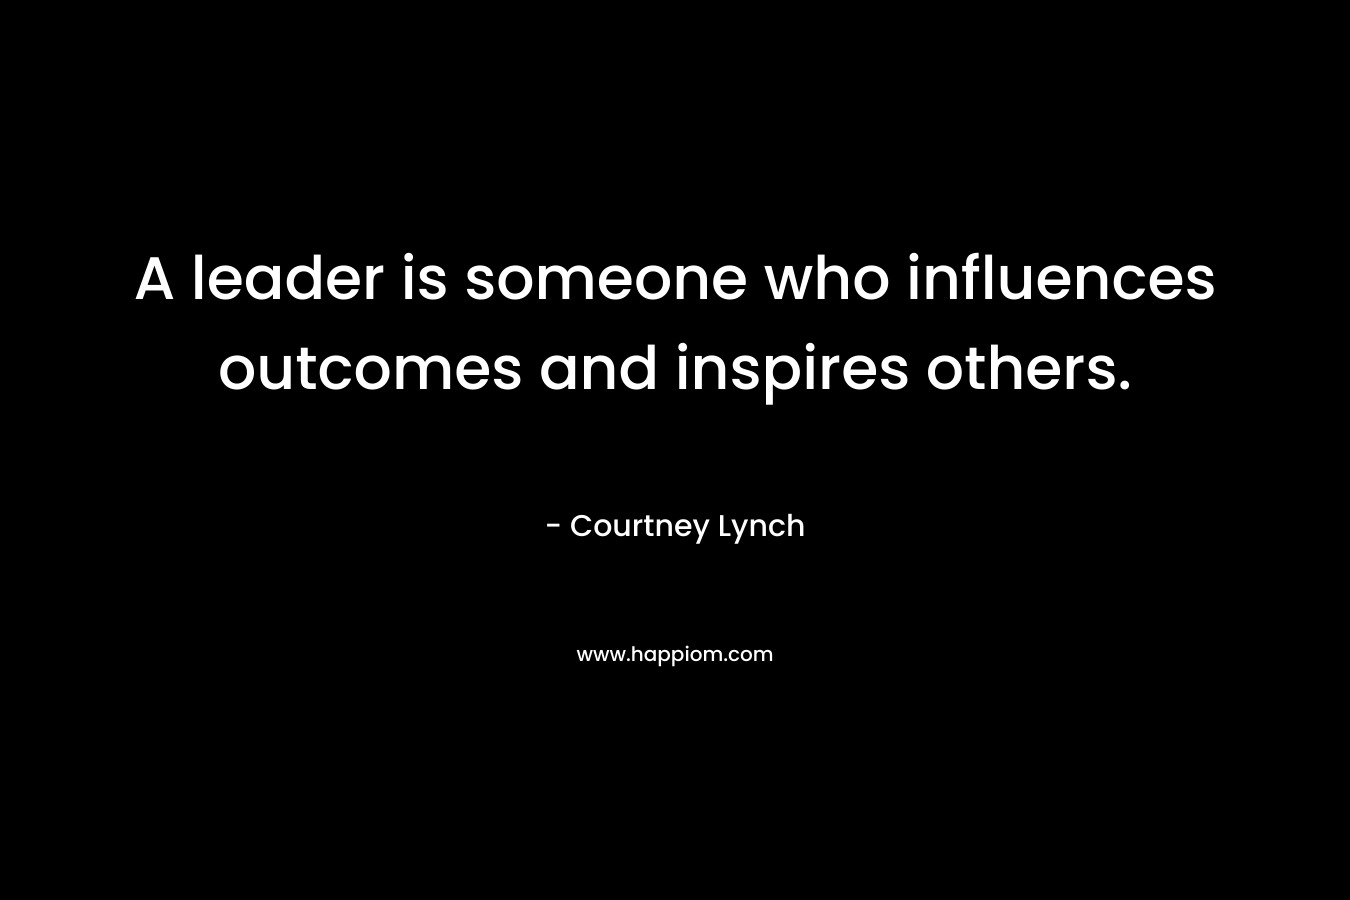 A leader is someone who influences outcomes and inspires others. – Courtney Lynch